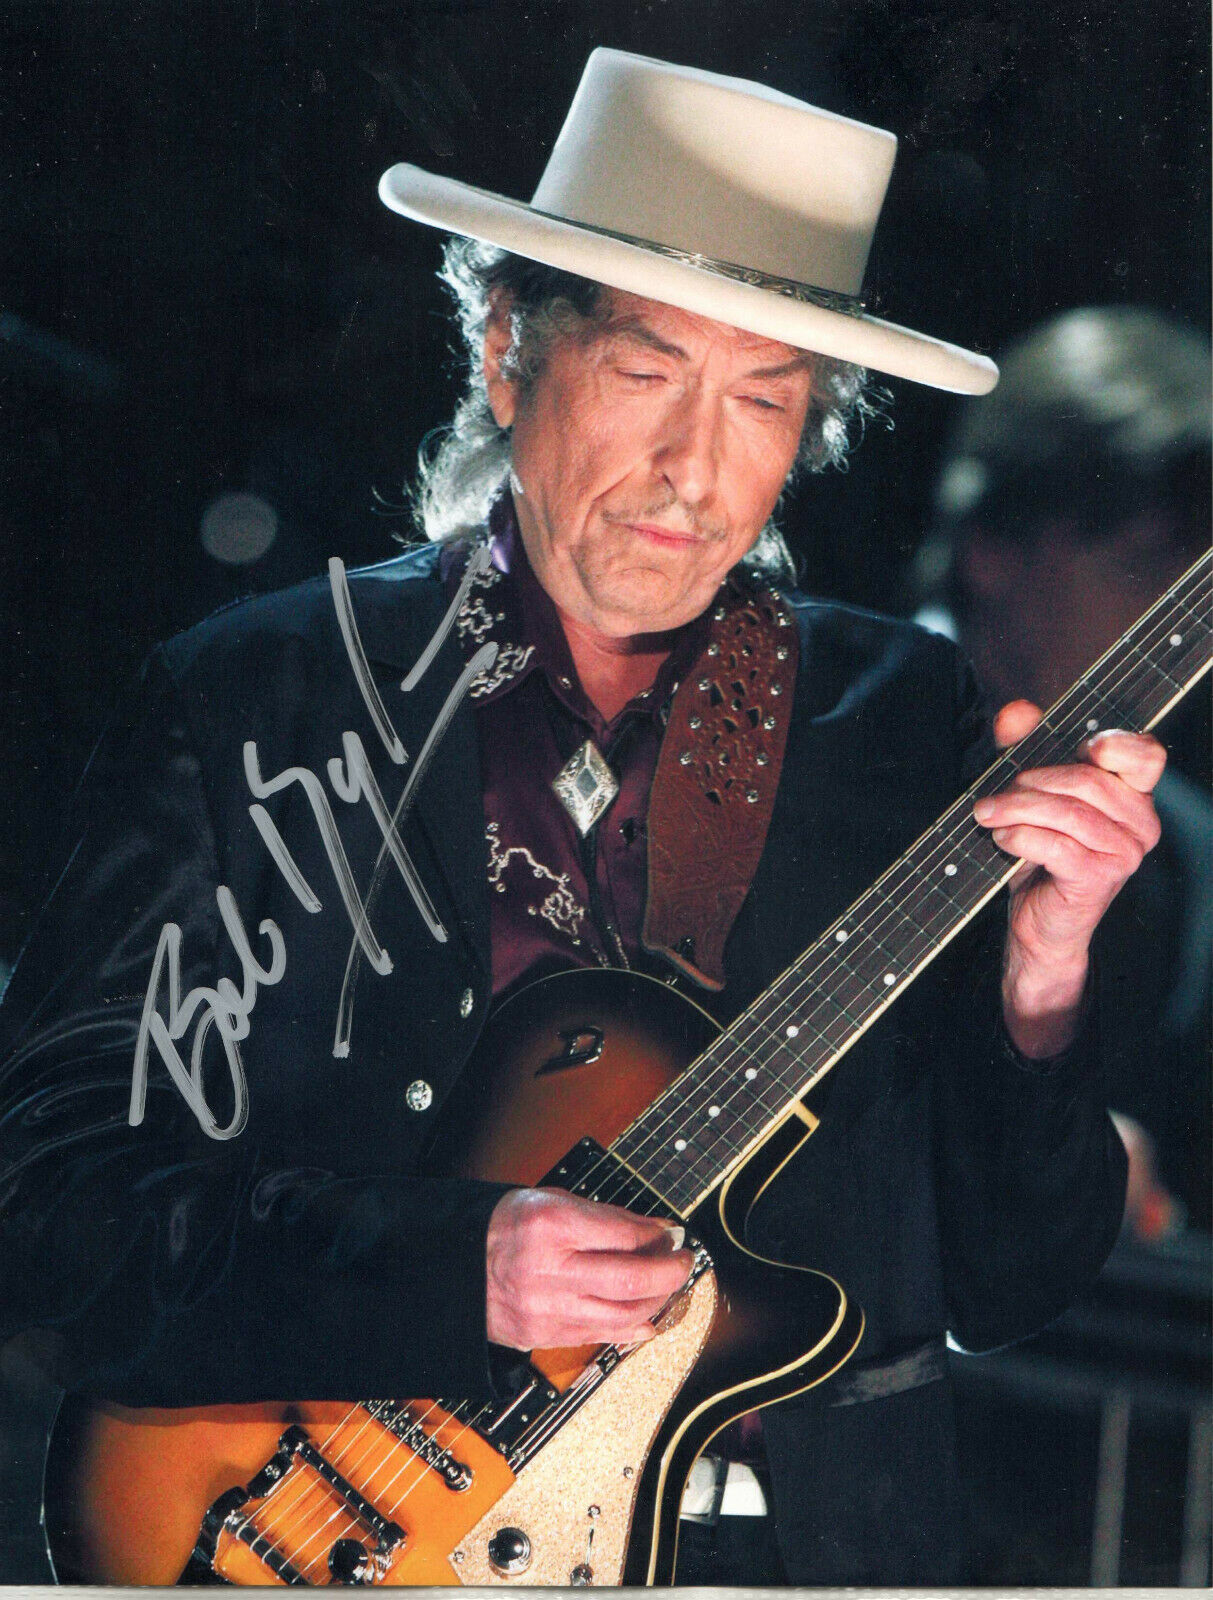 BOB DYLAN - POET/SONGWRITER - LEGEND - HAND SIGNED AUTOGRAPHED PHOTO WITH COA